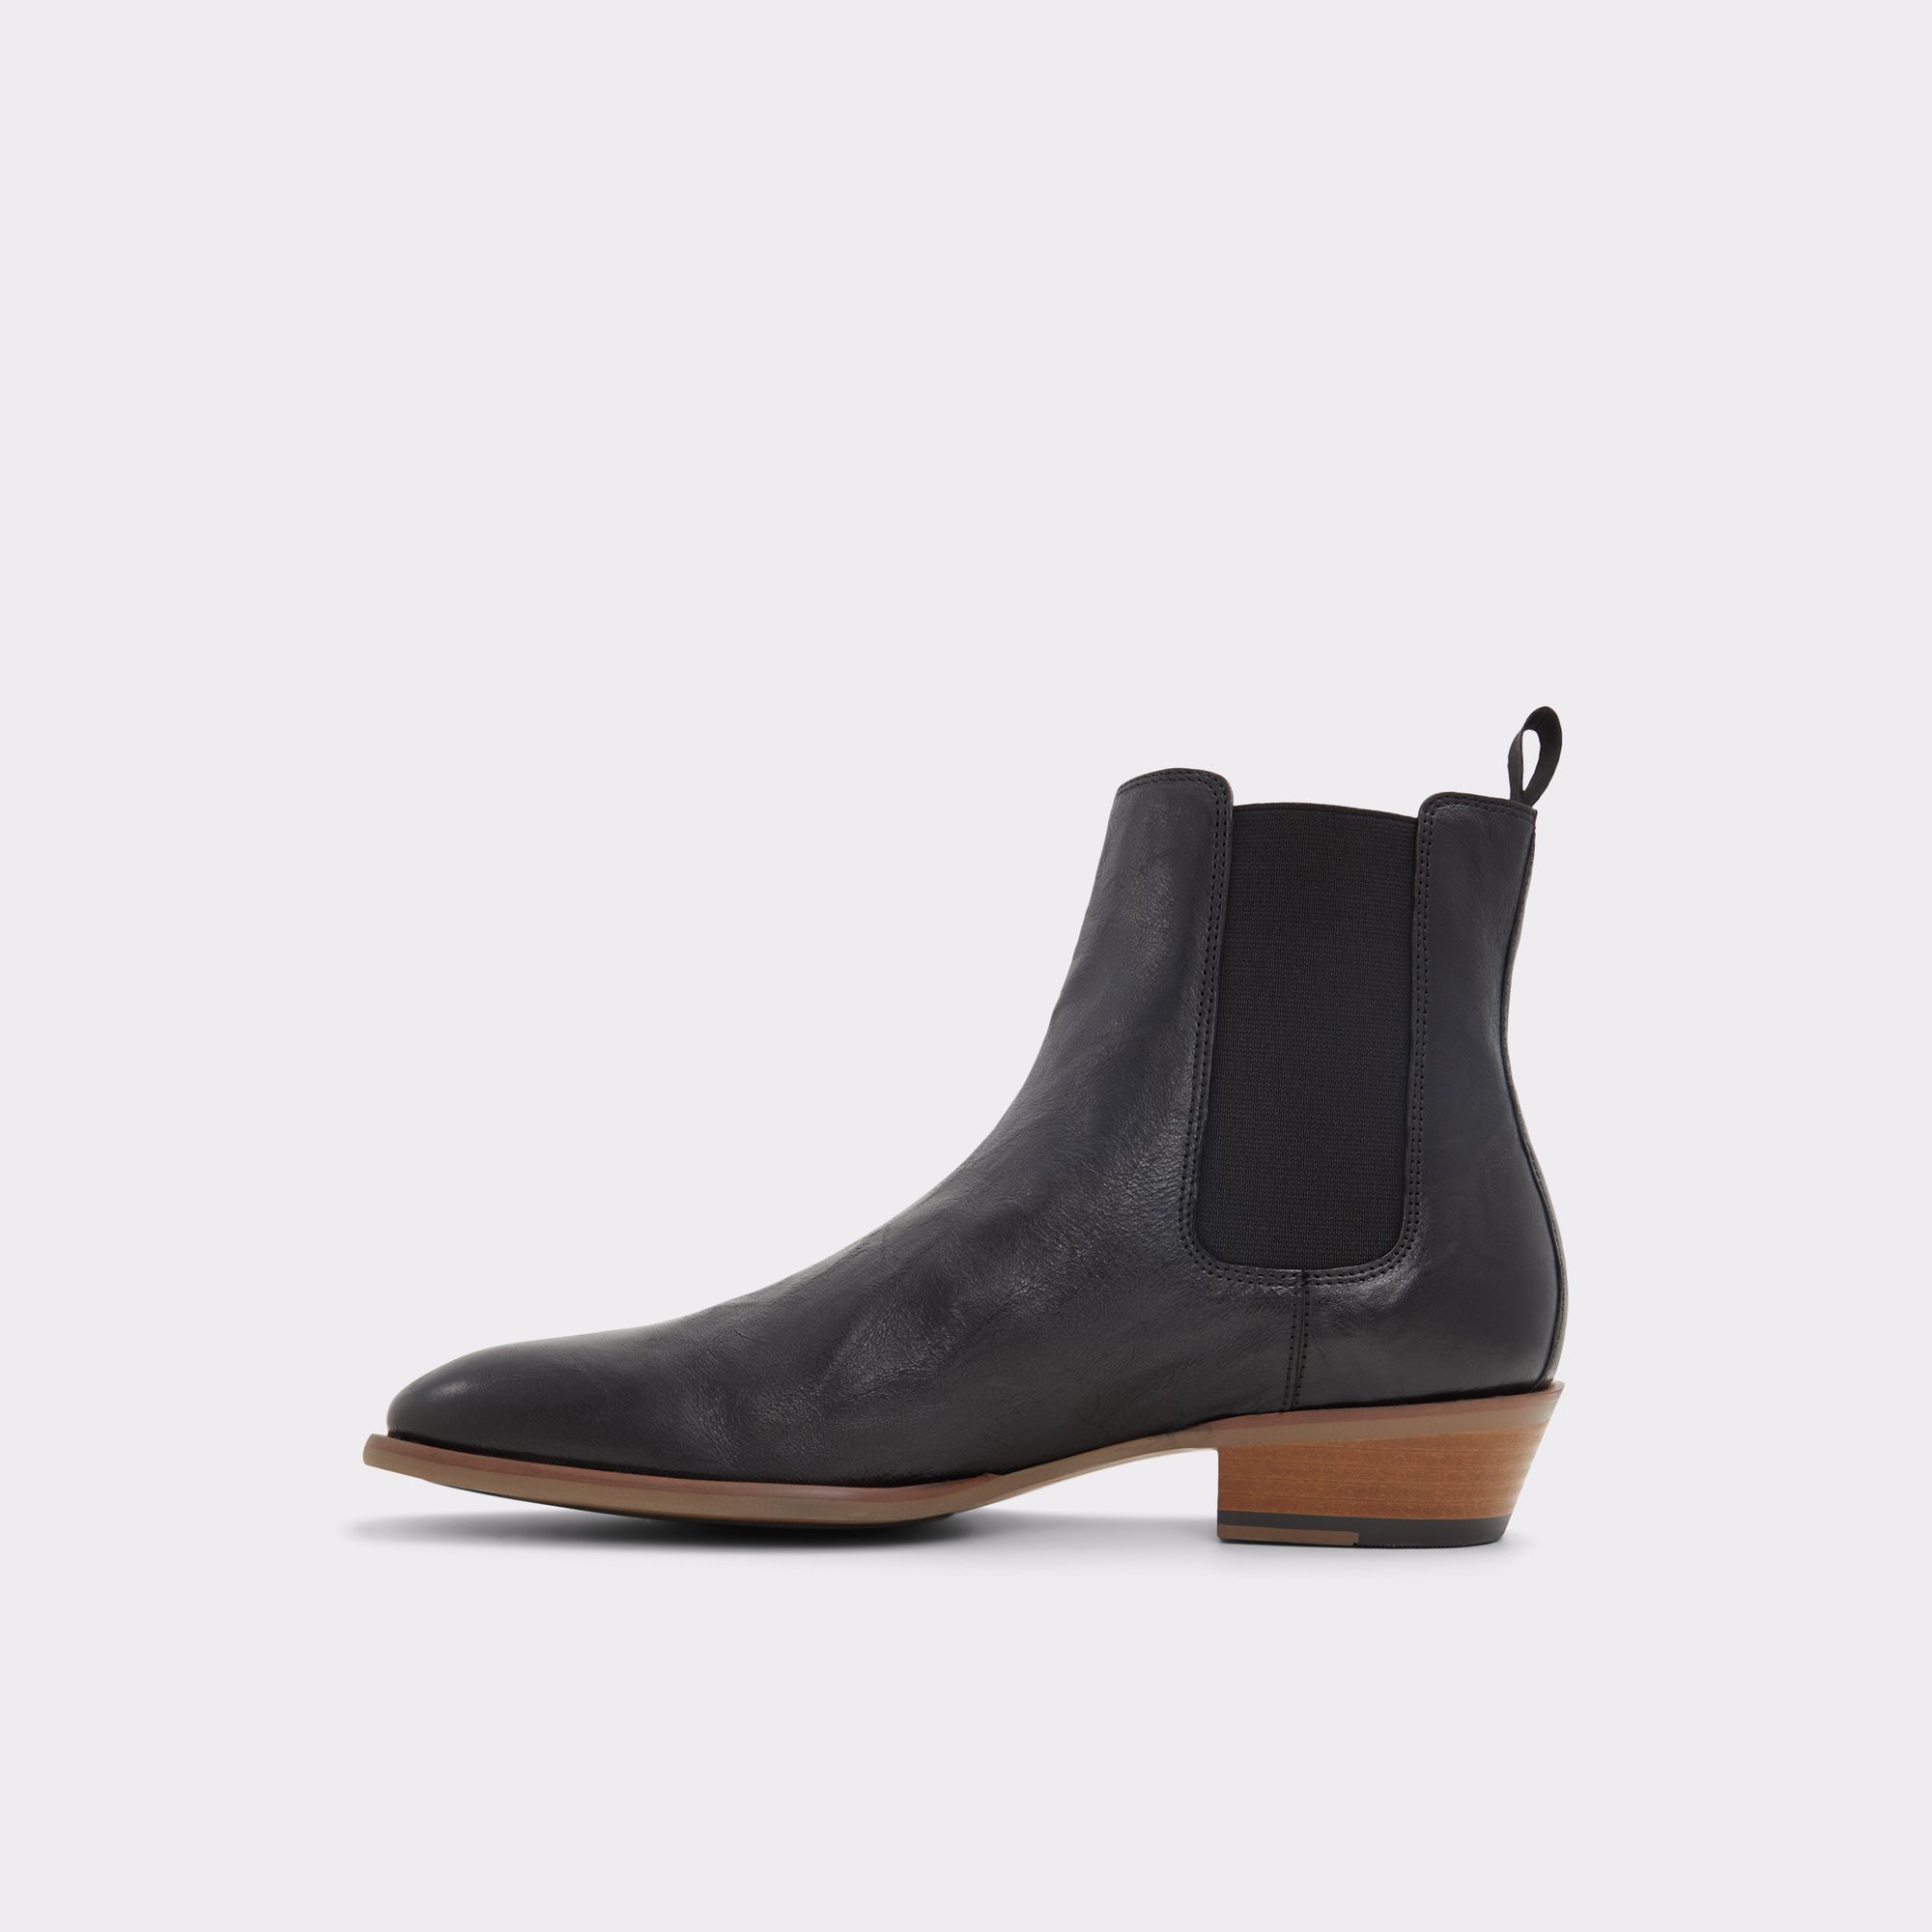 Priawyn Black Leather Smooth Men's Casual boots | ALDO US